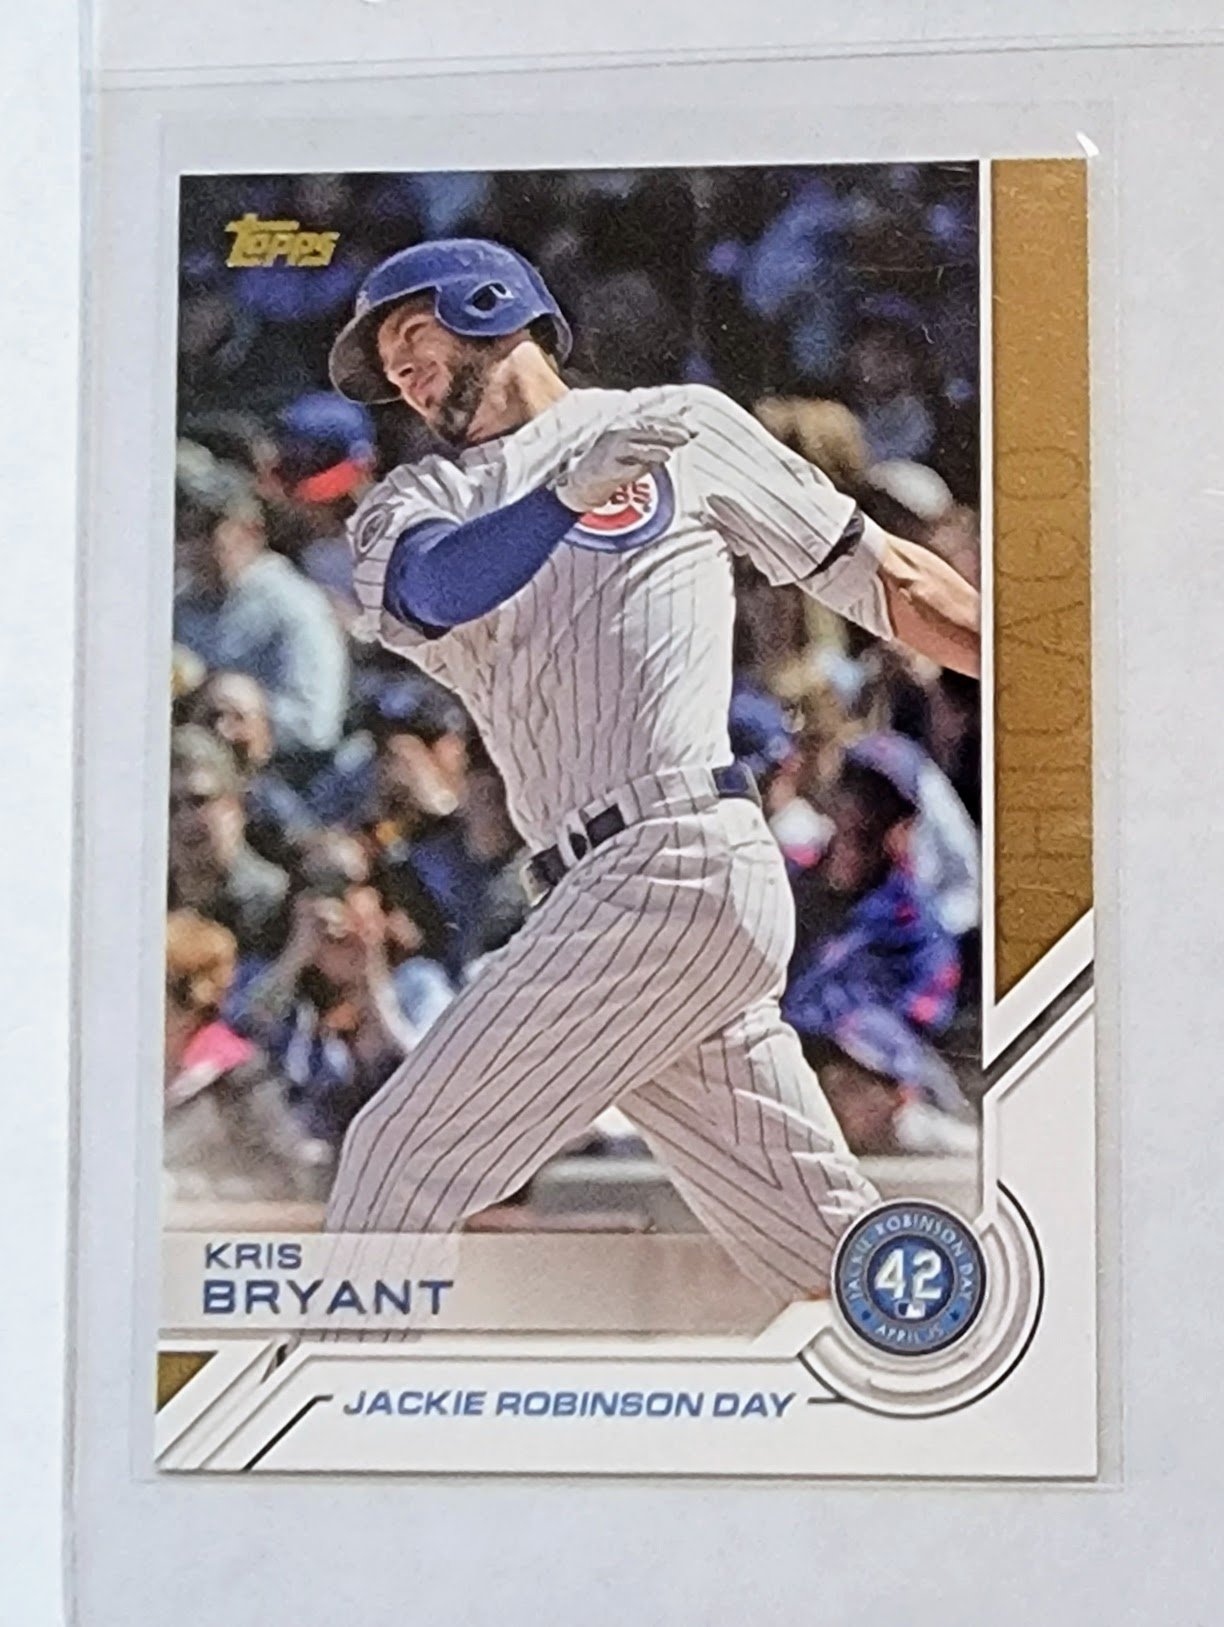 2017 Topps Kris Bryant Jackie Robinson Day Insert Baseball Card TPTV simple Xclusive Collectibles   